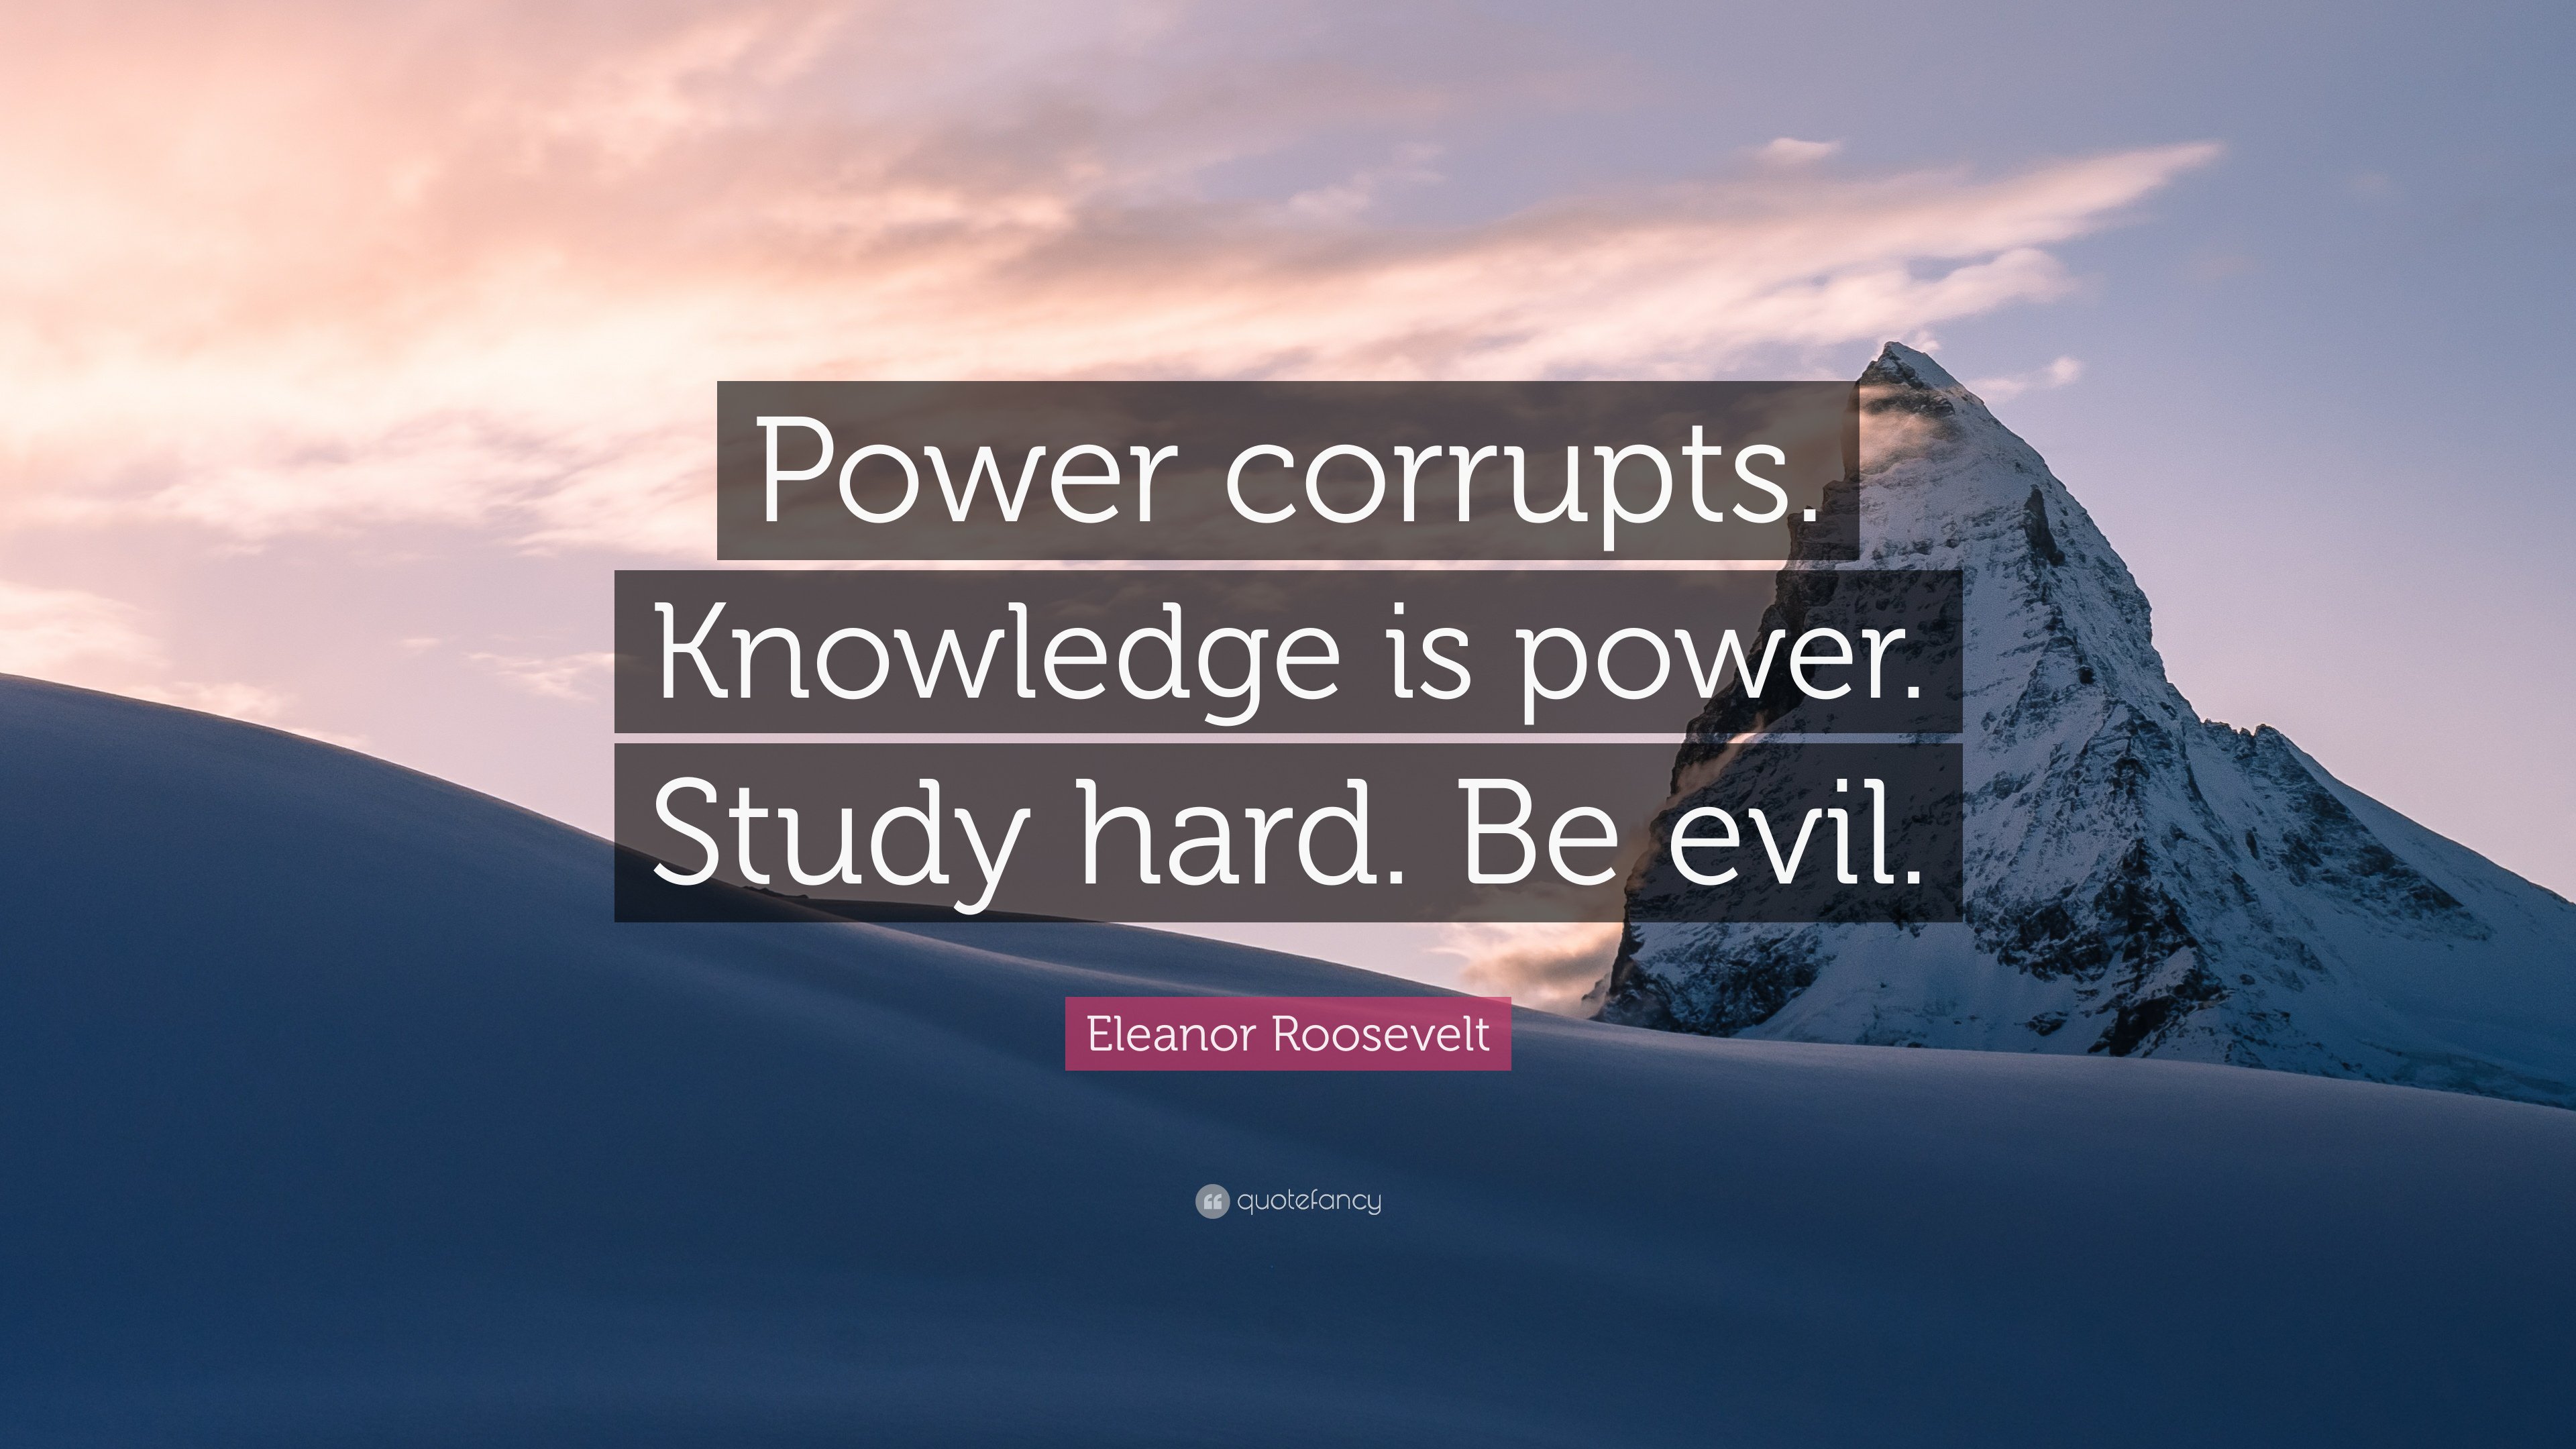 Eleanor Roosevelt Quote: “Power corrupts. Knowledge is power. Study hard. Be evil.”